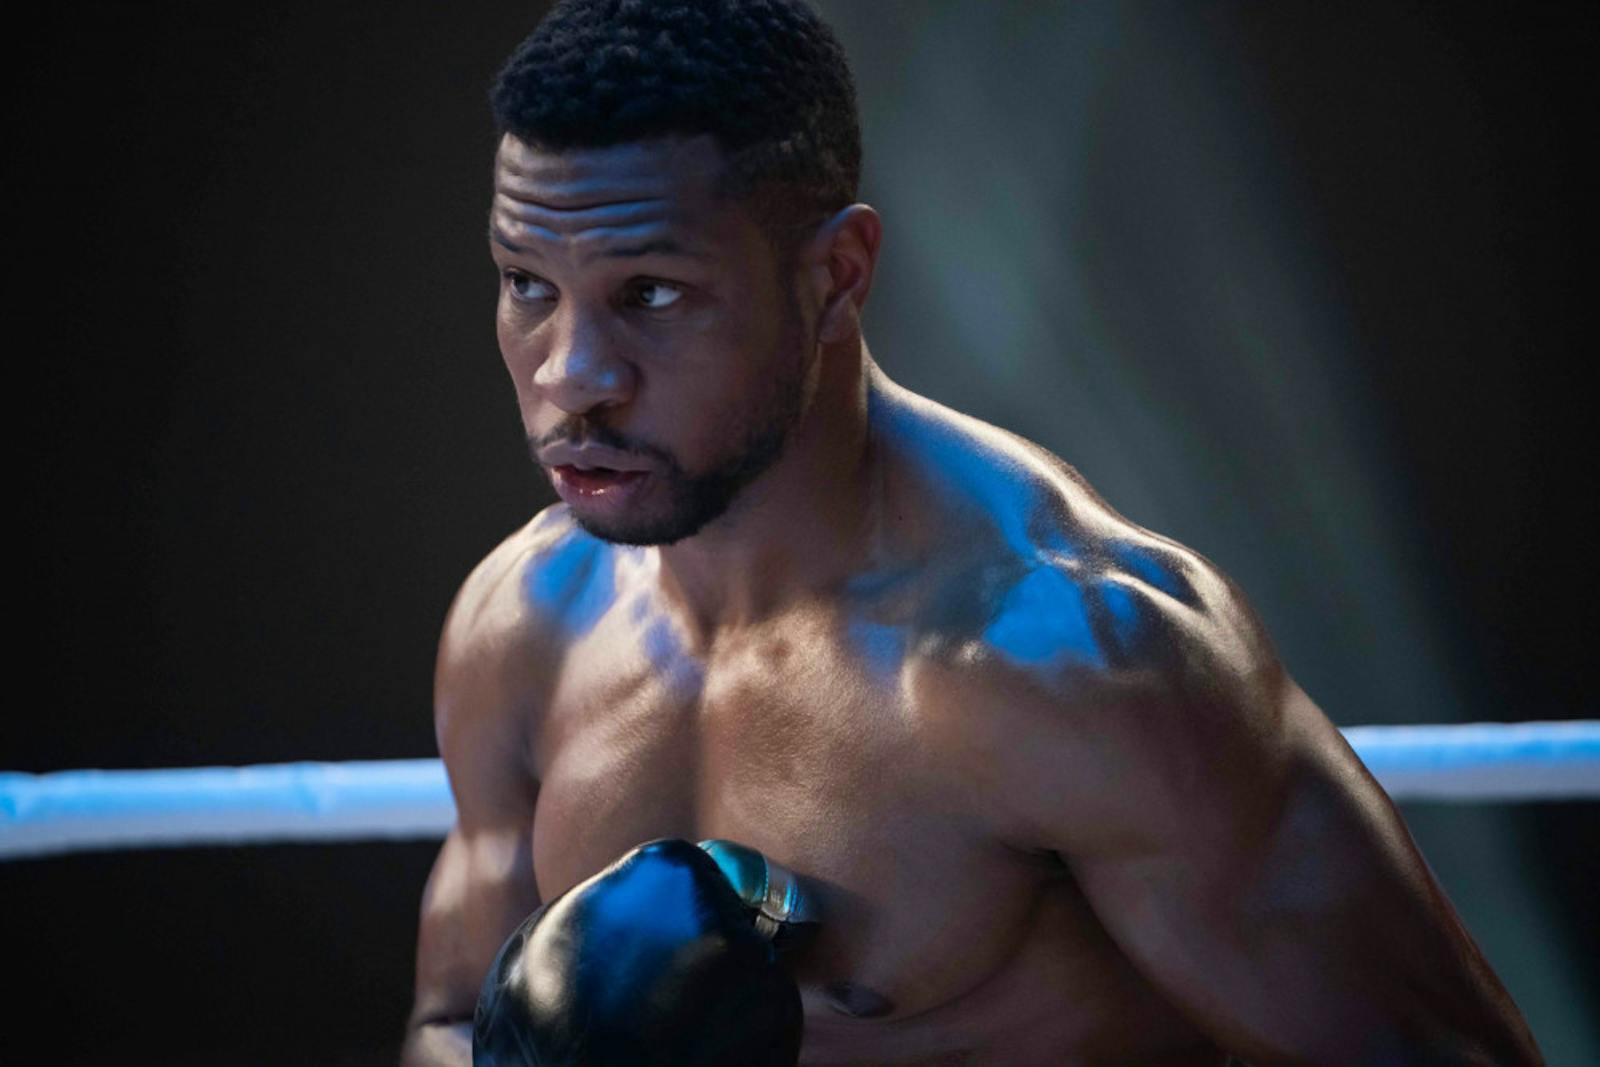 Creed III': Michael B. Jordan and Tessa Thompson on Their 'Very Weird'  Experience Before Filming